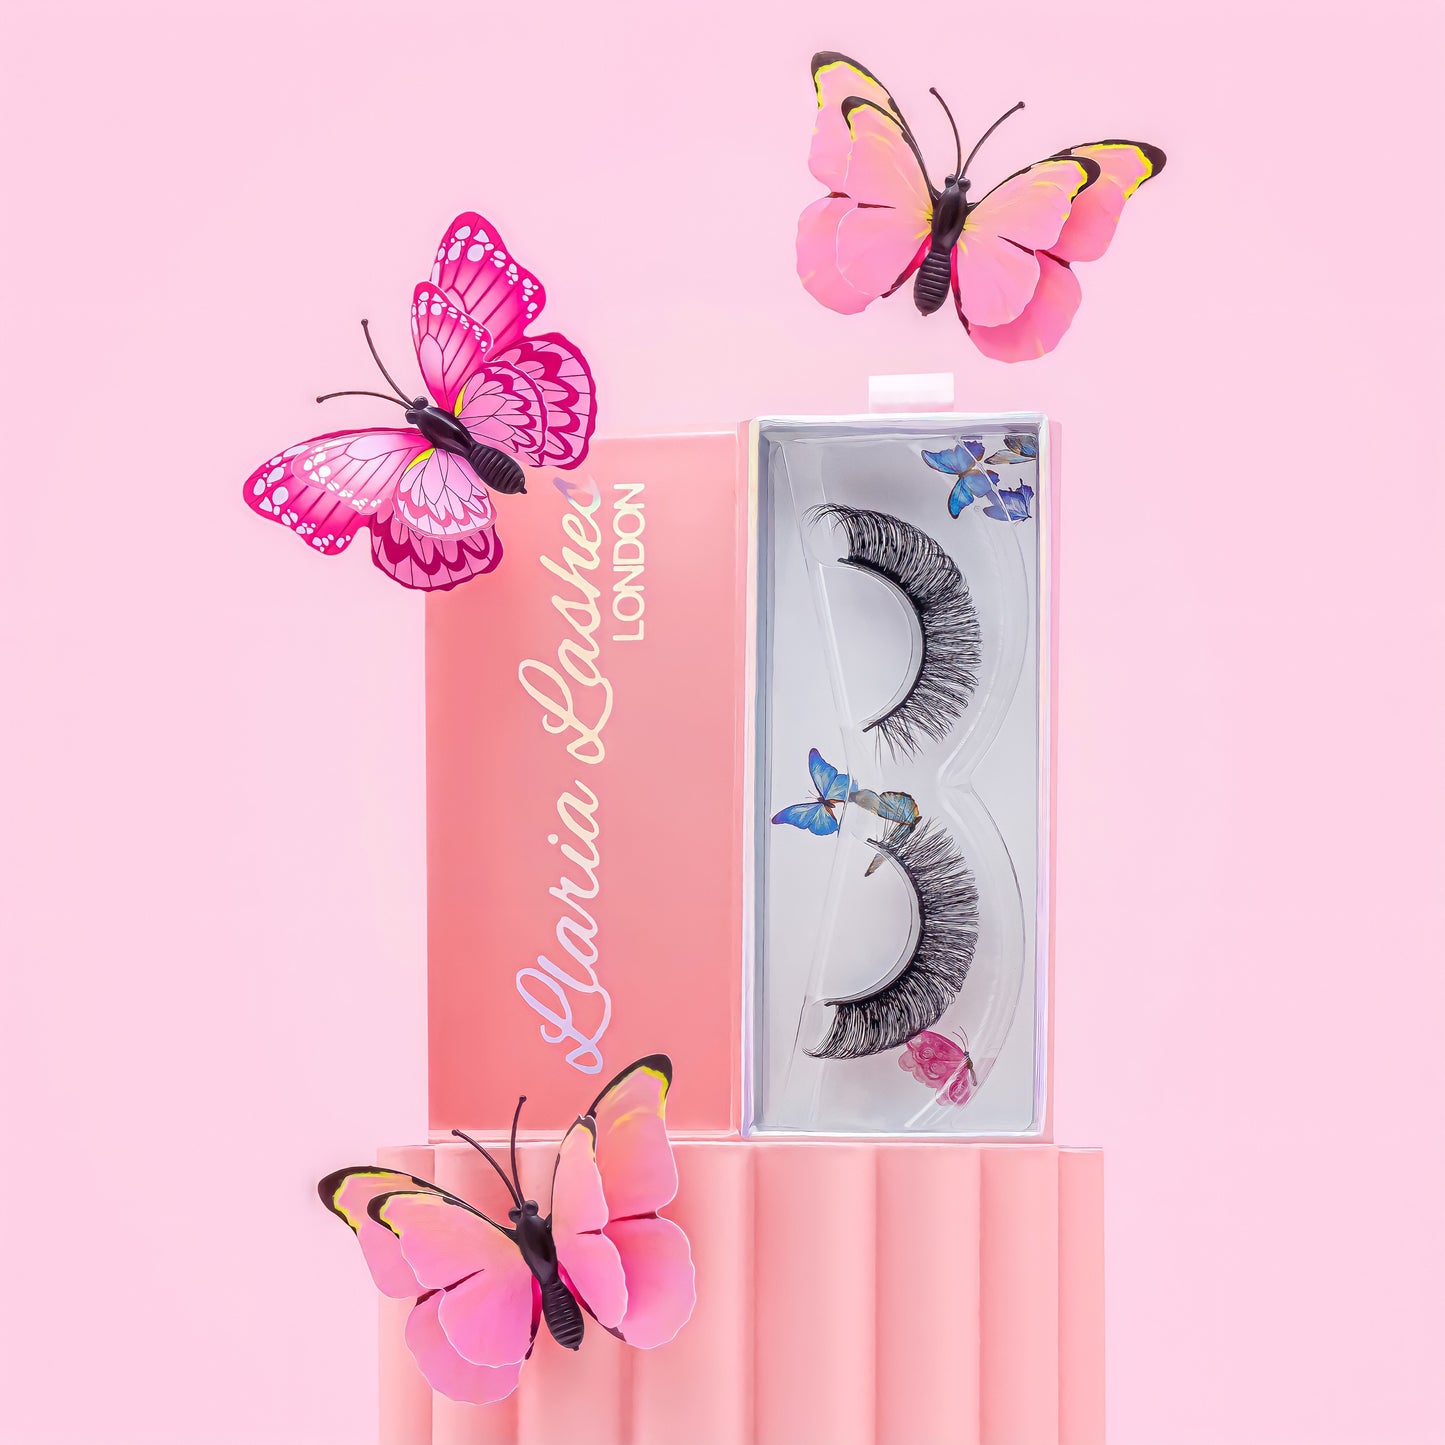 russian style strip false eyelashes in lash box with butterflies.